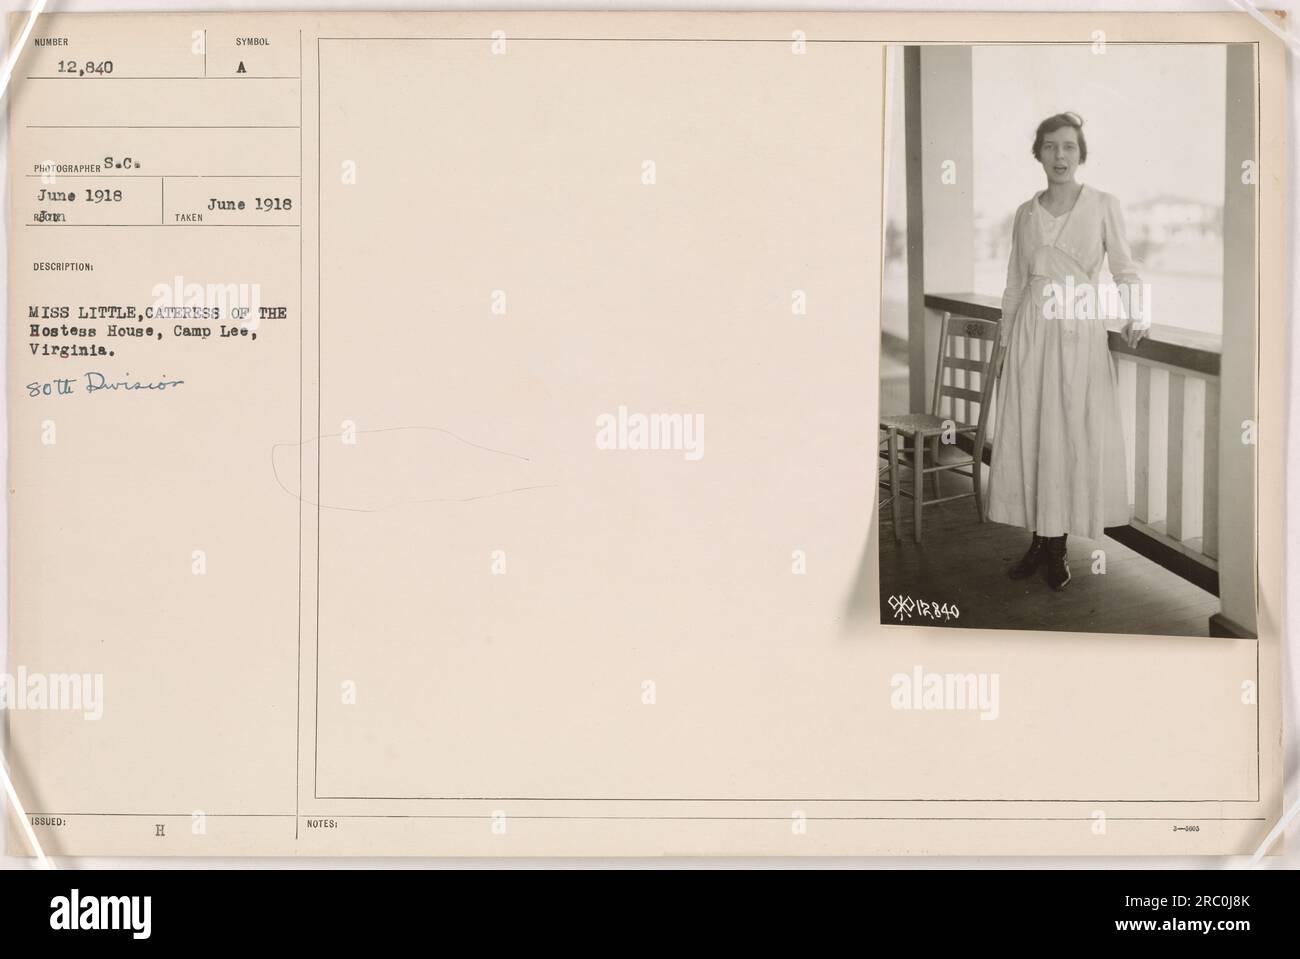 A photograph taken in June 1918 at Camp Lee, Virginia. The image shows Miss Little, who is a cateress at the Hostess House. The photograph is labeled as 111-SC-12840 and was taken by an S.C. photographer. Stock Photo